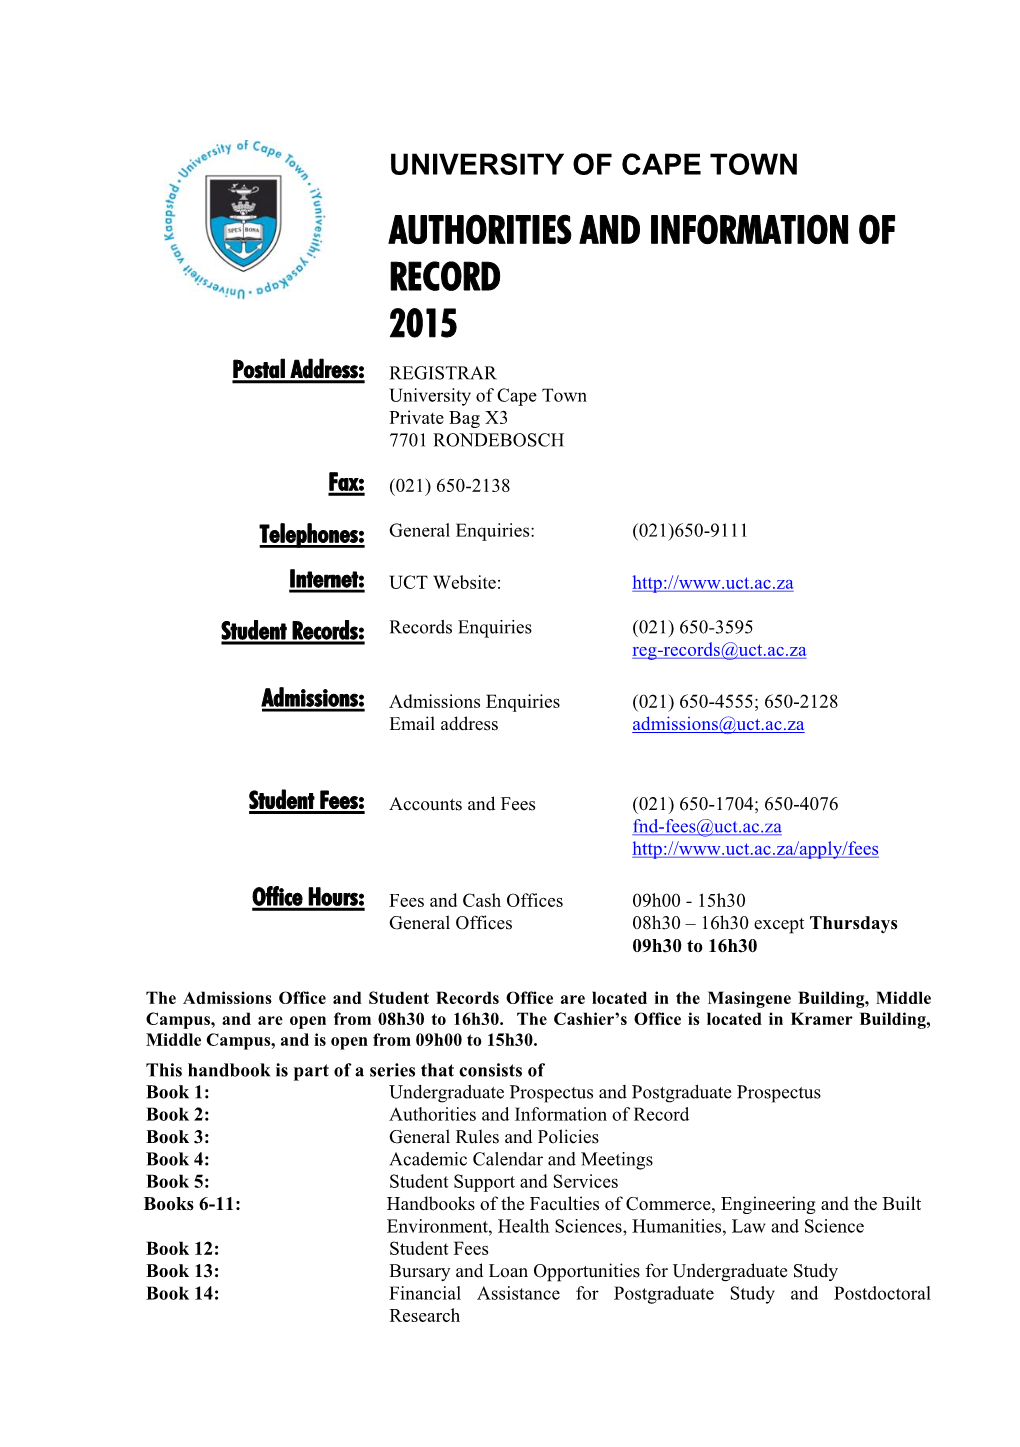 Authorities and Information of Record 2015